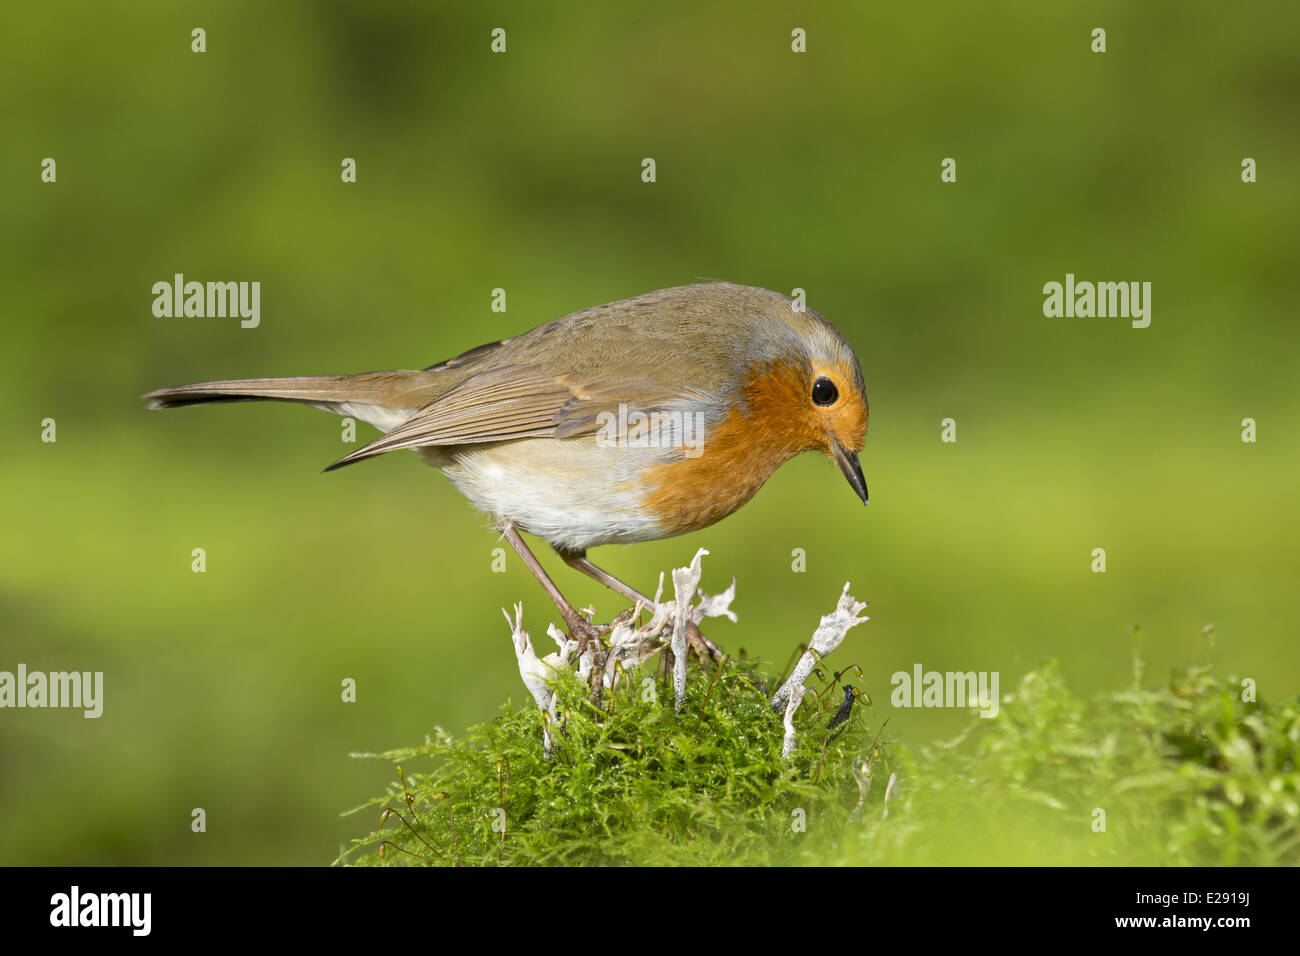 European Robin (Erithacus rubecula) adult, standing on moss covered stump with Candle-snuff Fungus (Xylaria hypoxylon), Suffolk, England, January Stock Photo